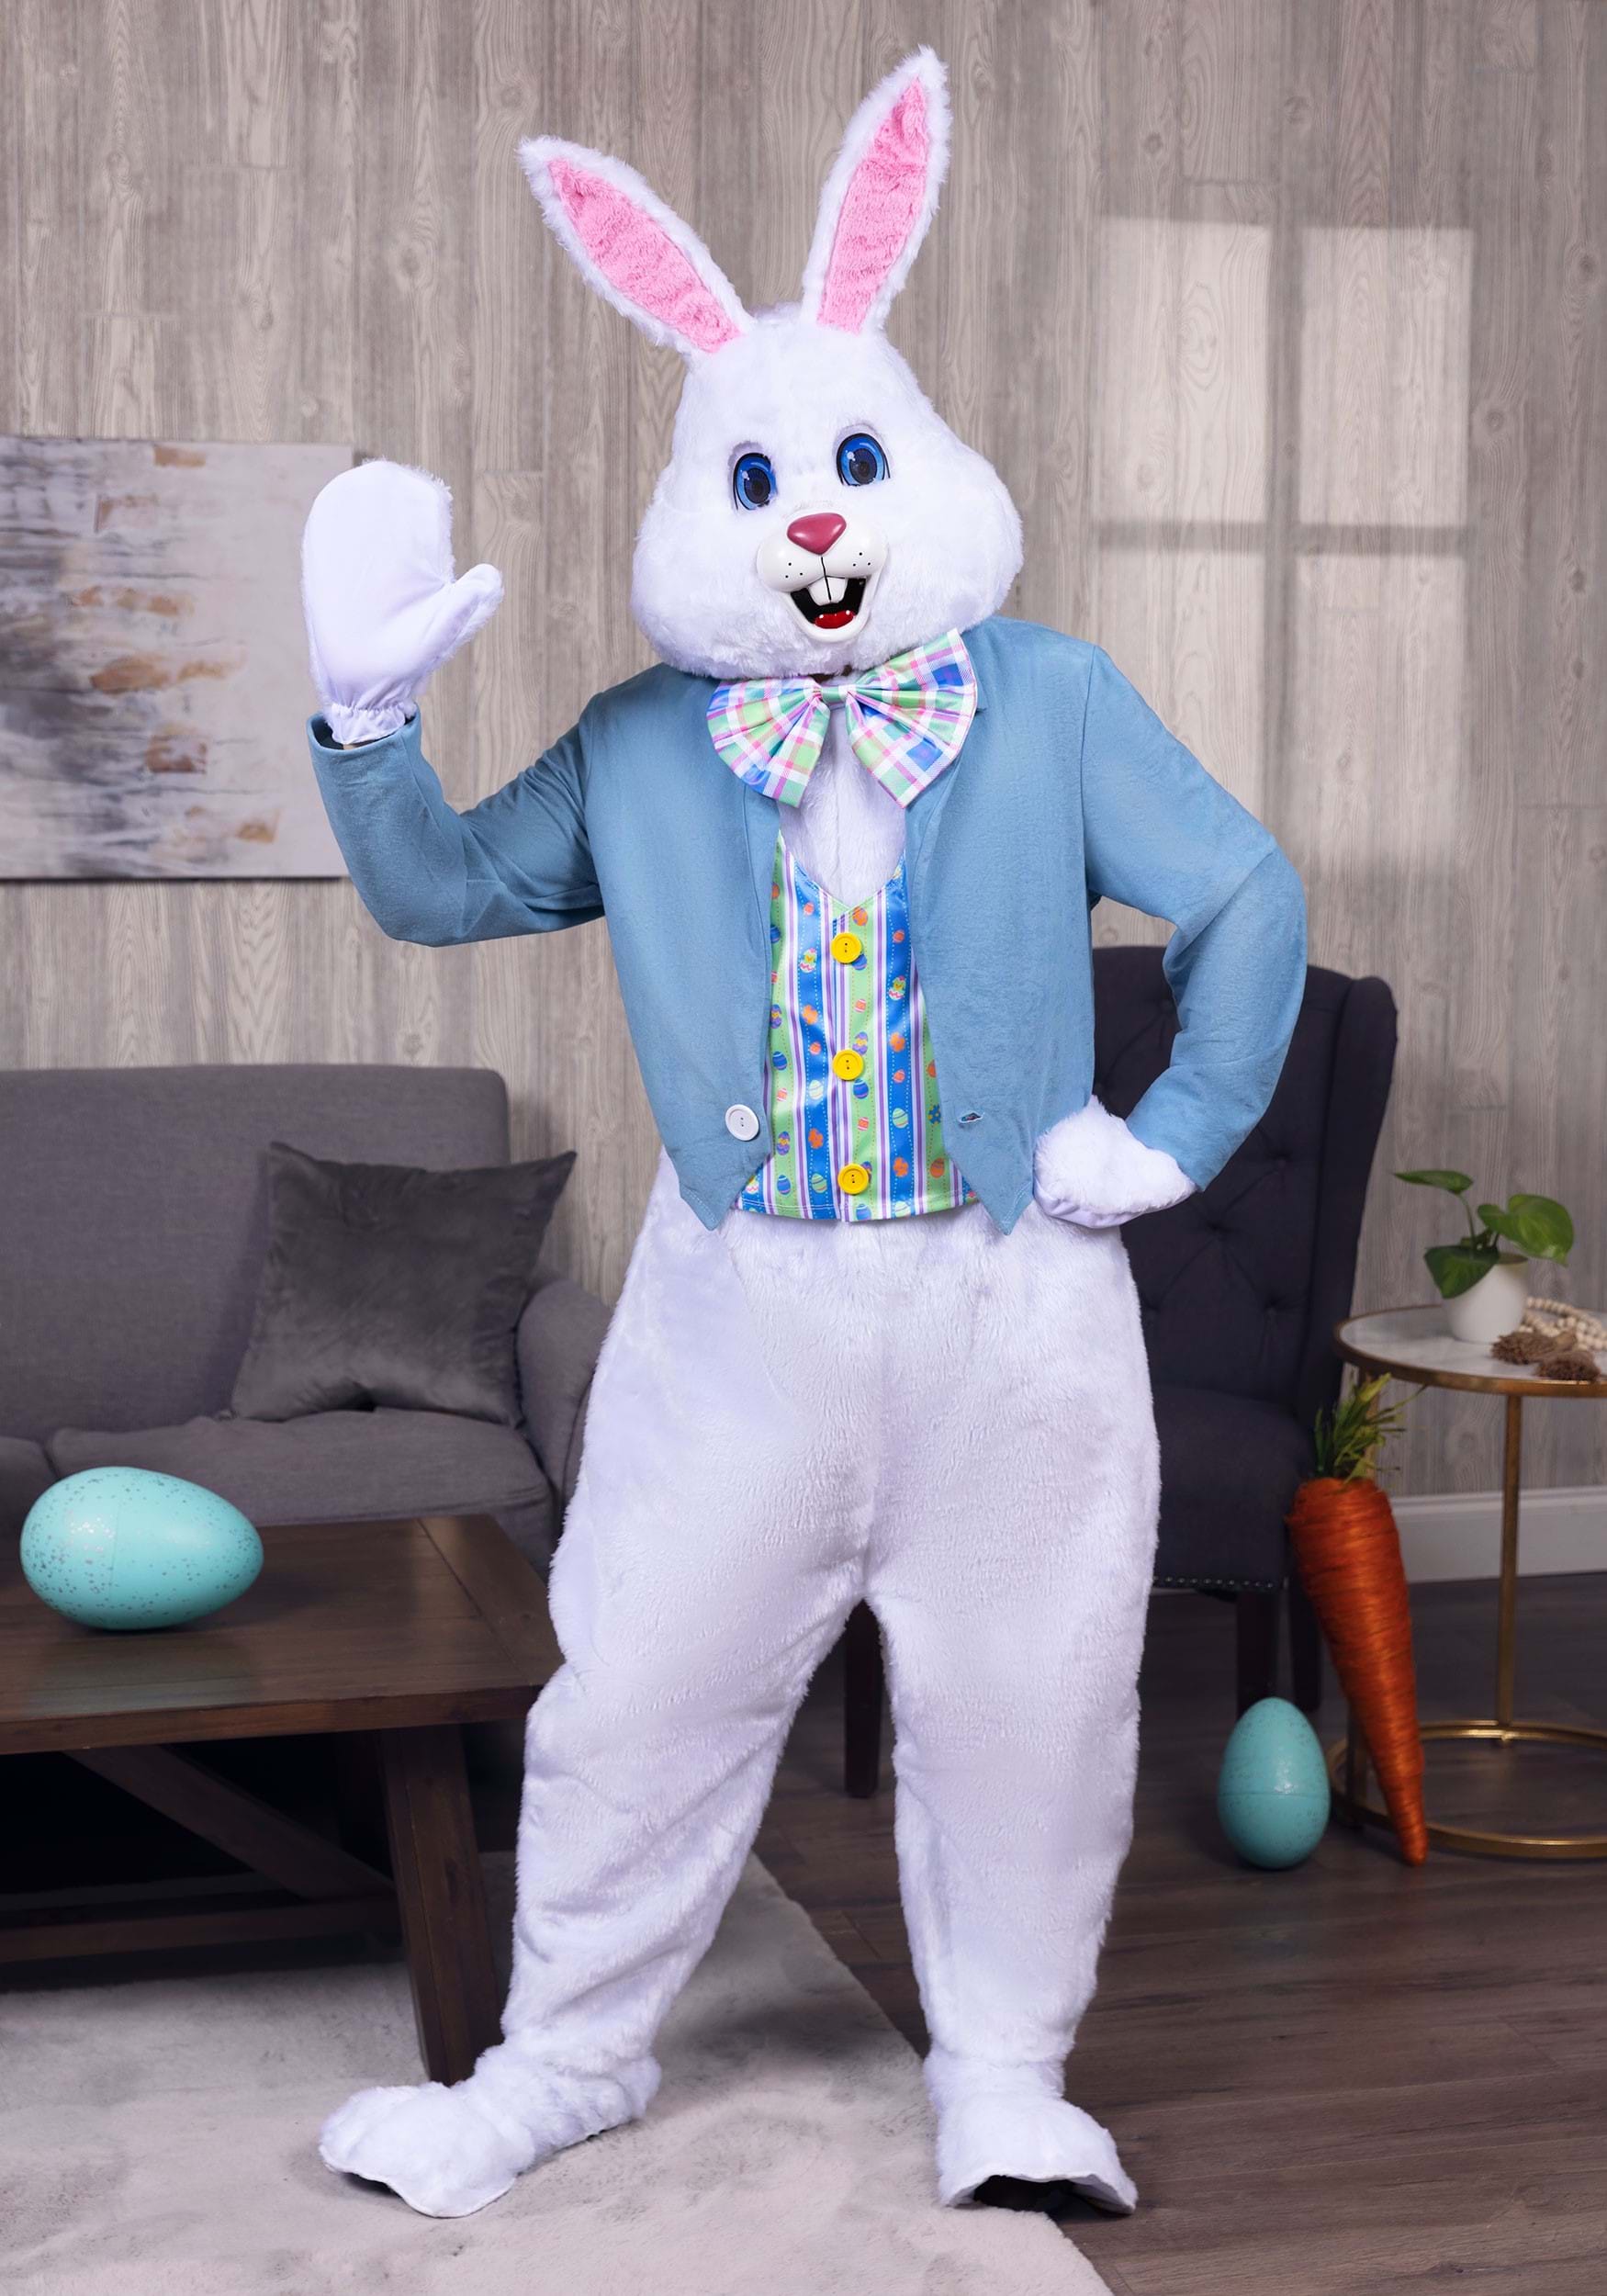 https://images.halloweencostumes.com/products/30021/2-1-306407/adult-deluxe-easter-bunny-costume-alt-1.jpg